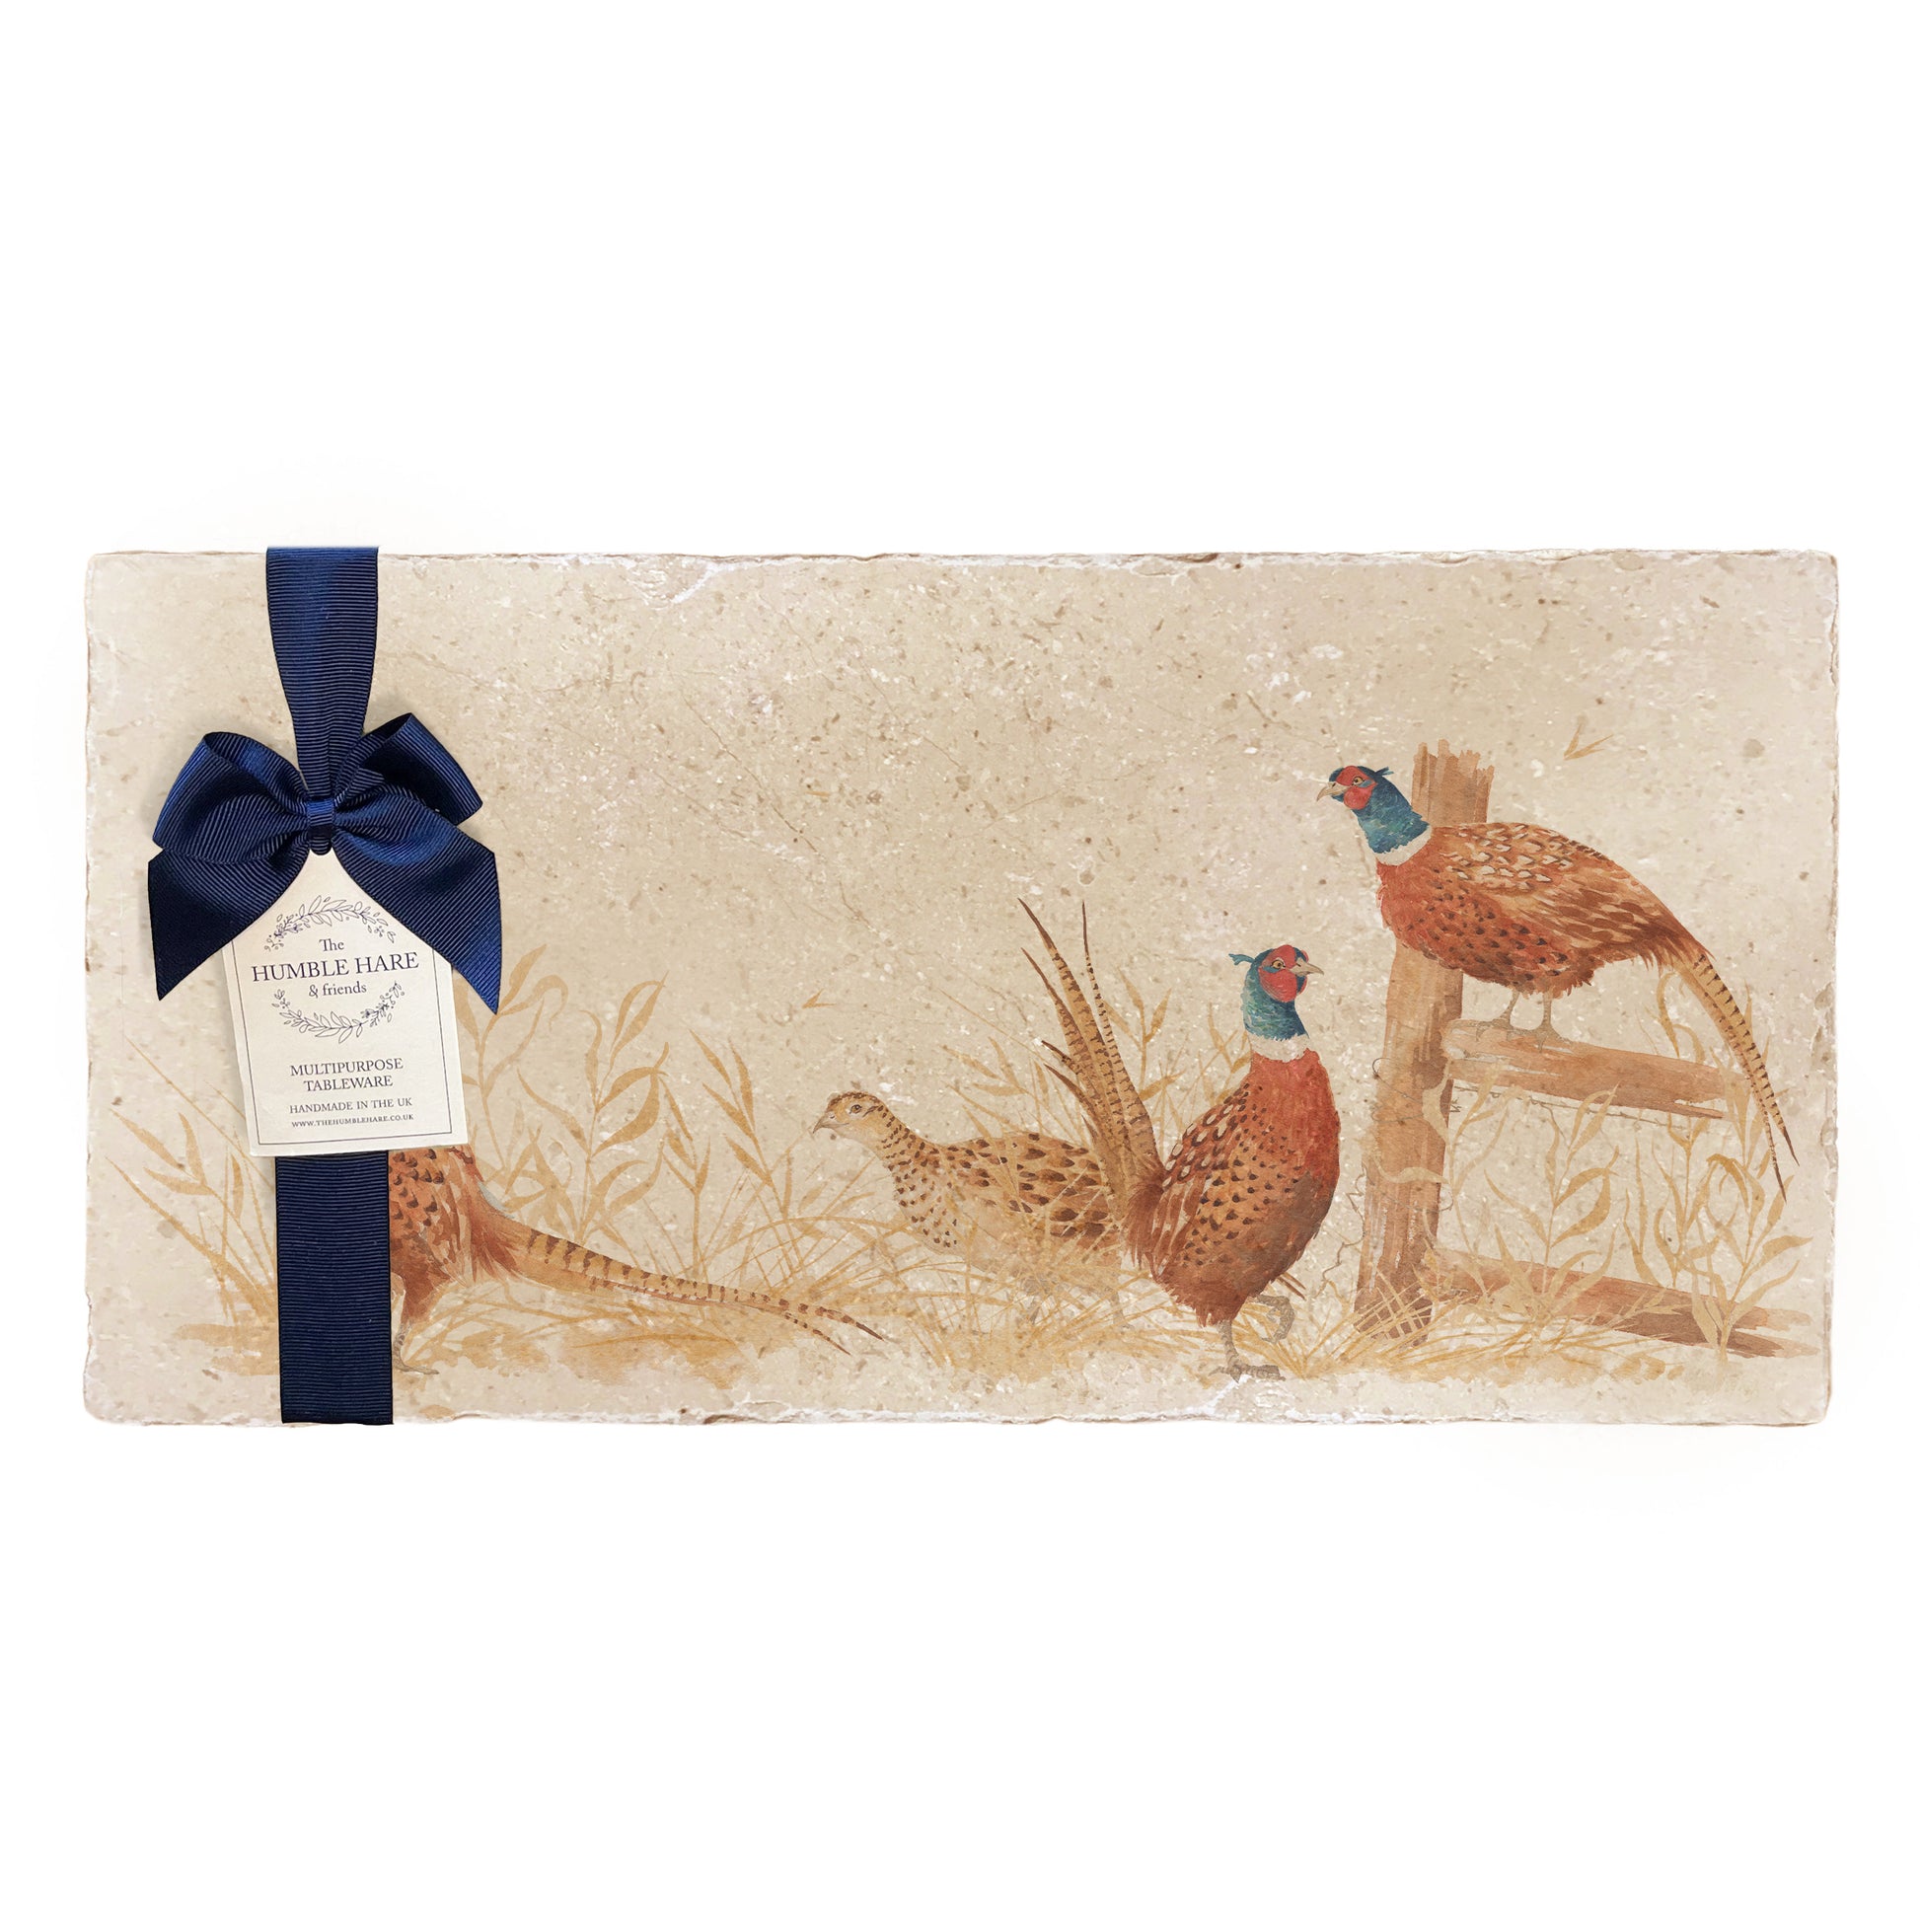 A multipurpose marble sharing platter with a watercolour pheasant design, packaged with a luxurious dark blue bow and branded gift tag.